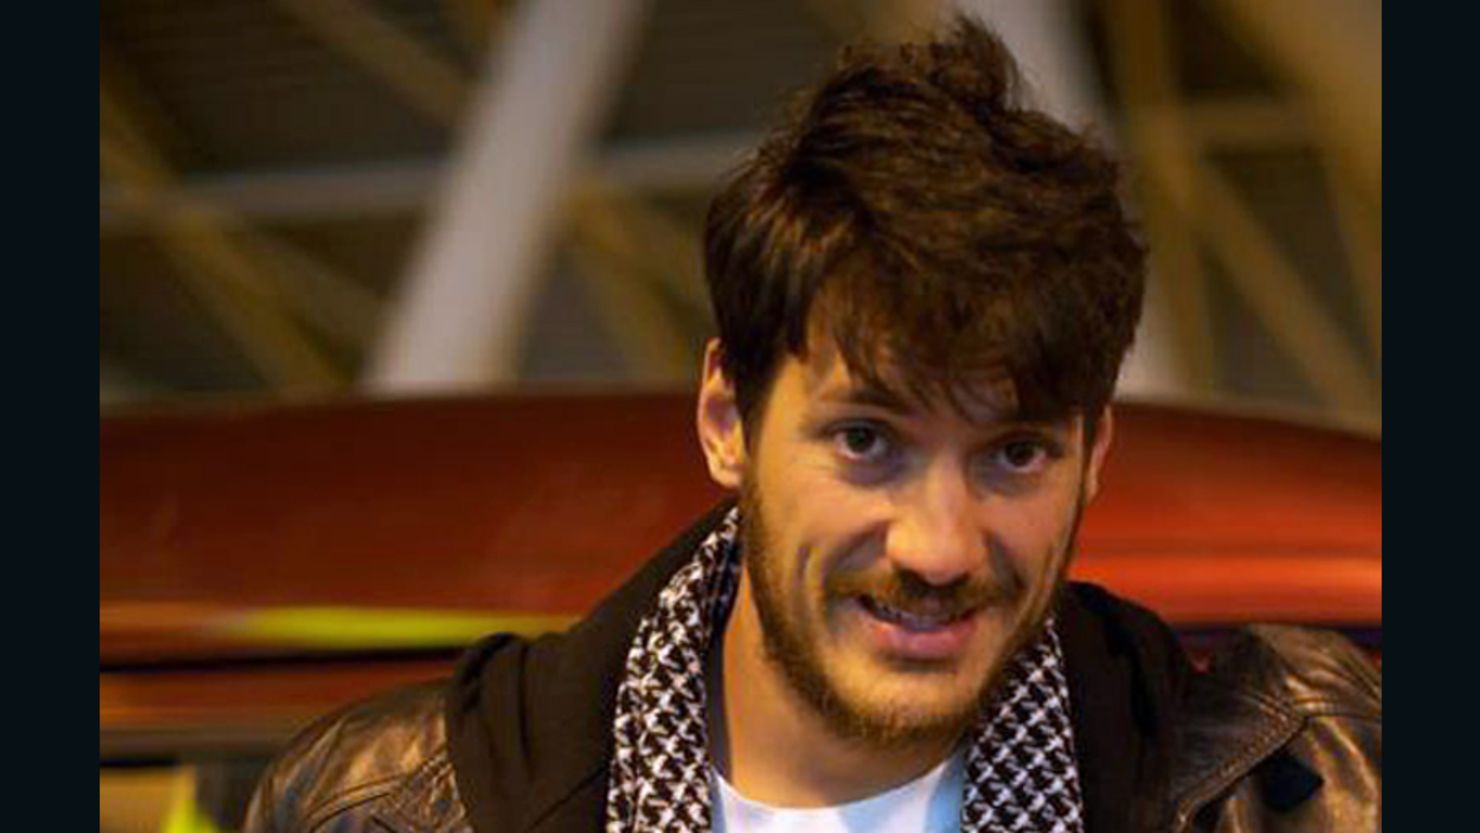 Freelance photographer Austin Tice pictured in Cairo in March 2012.